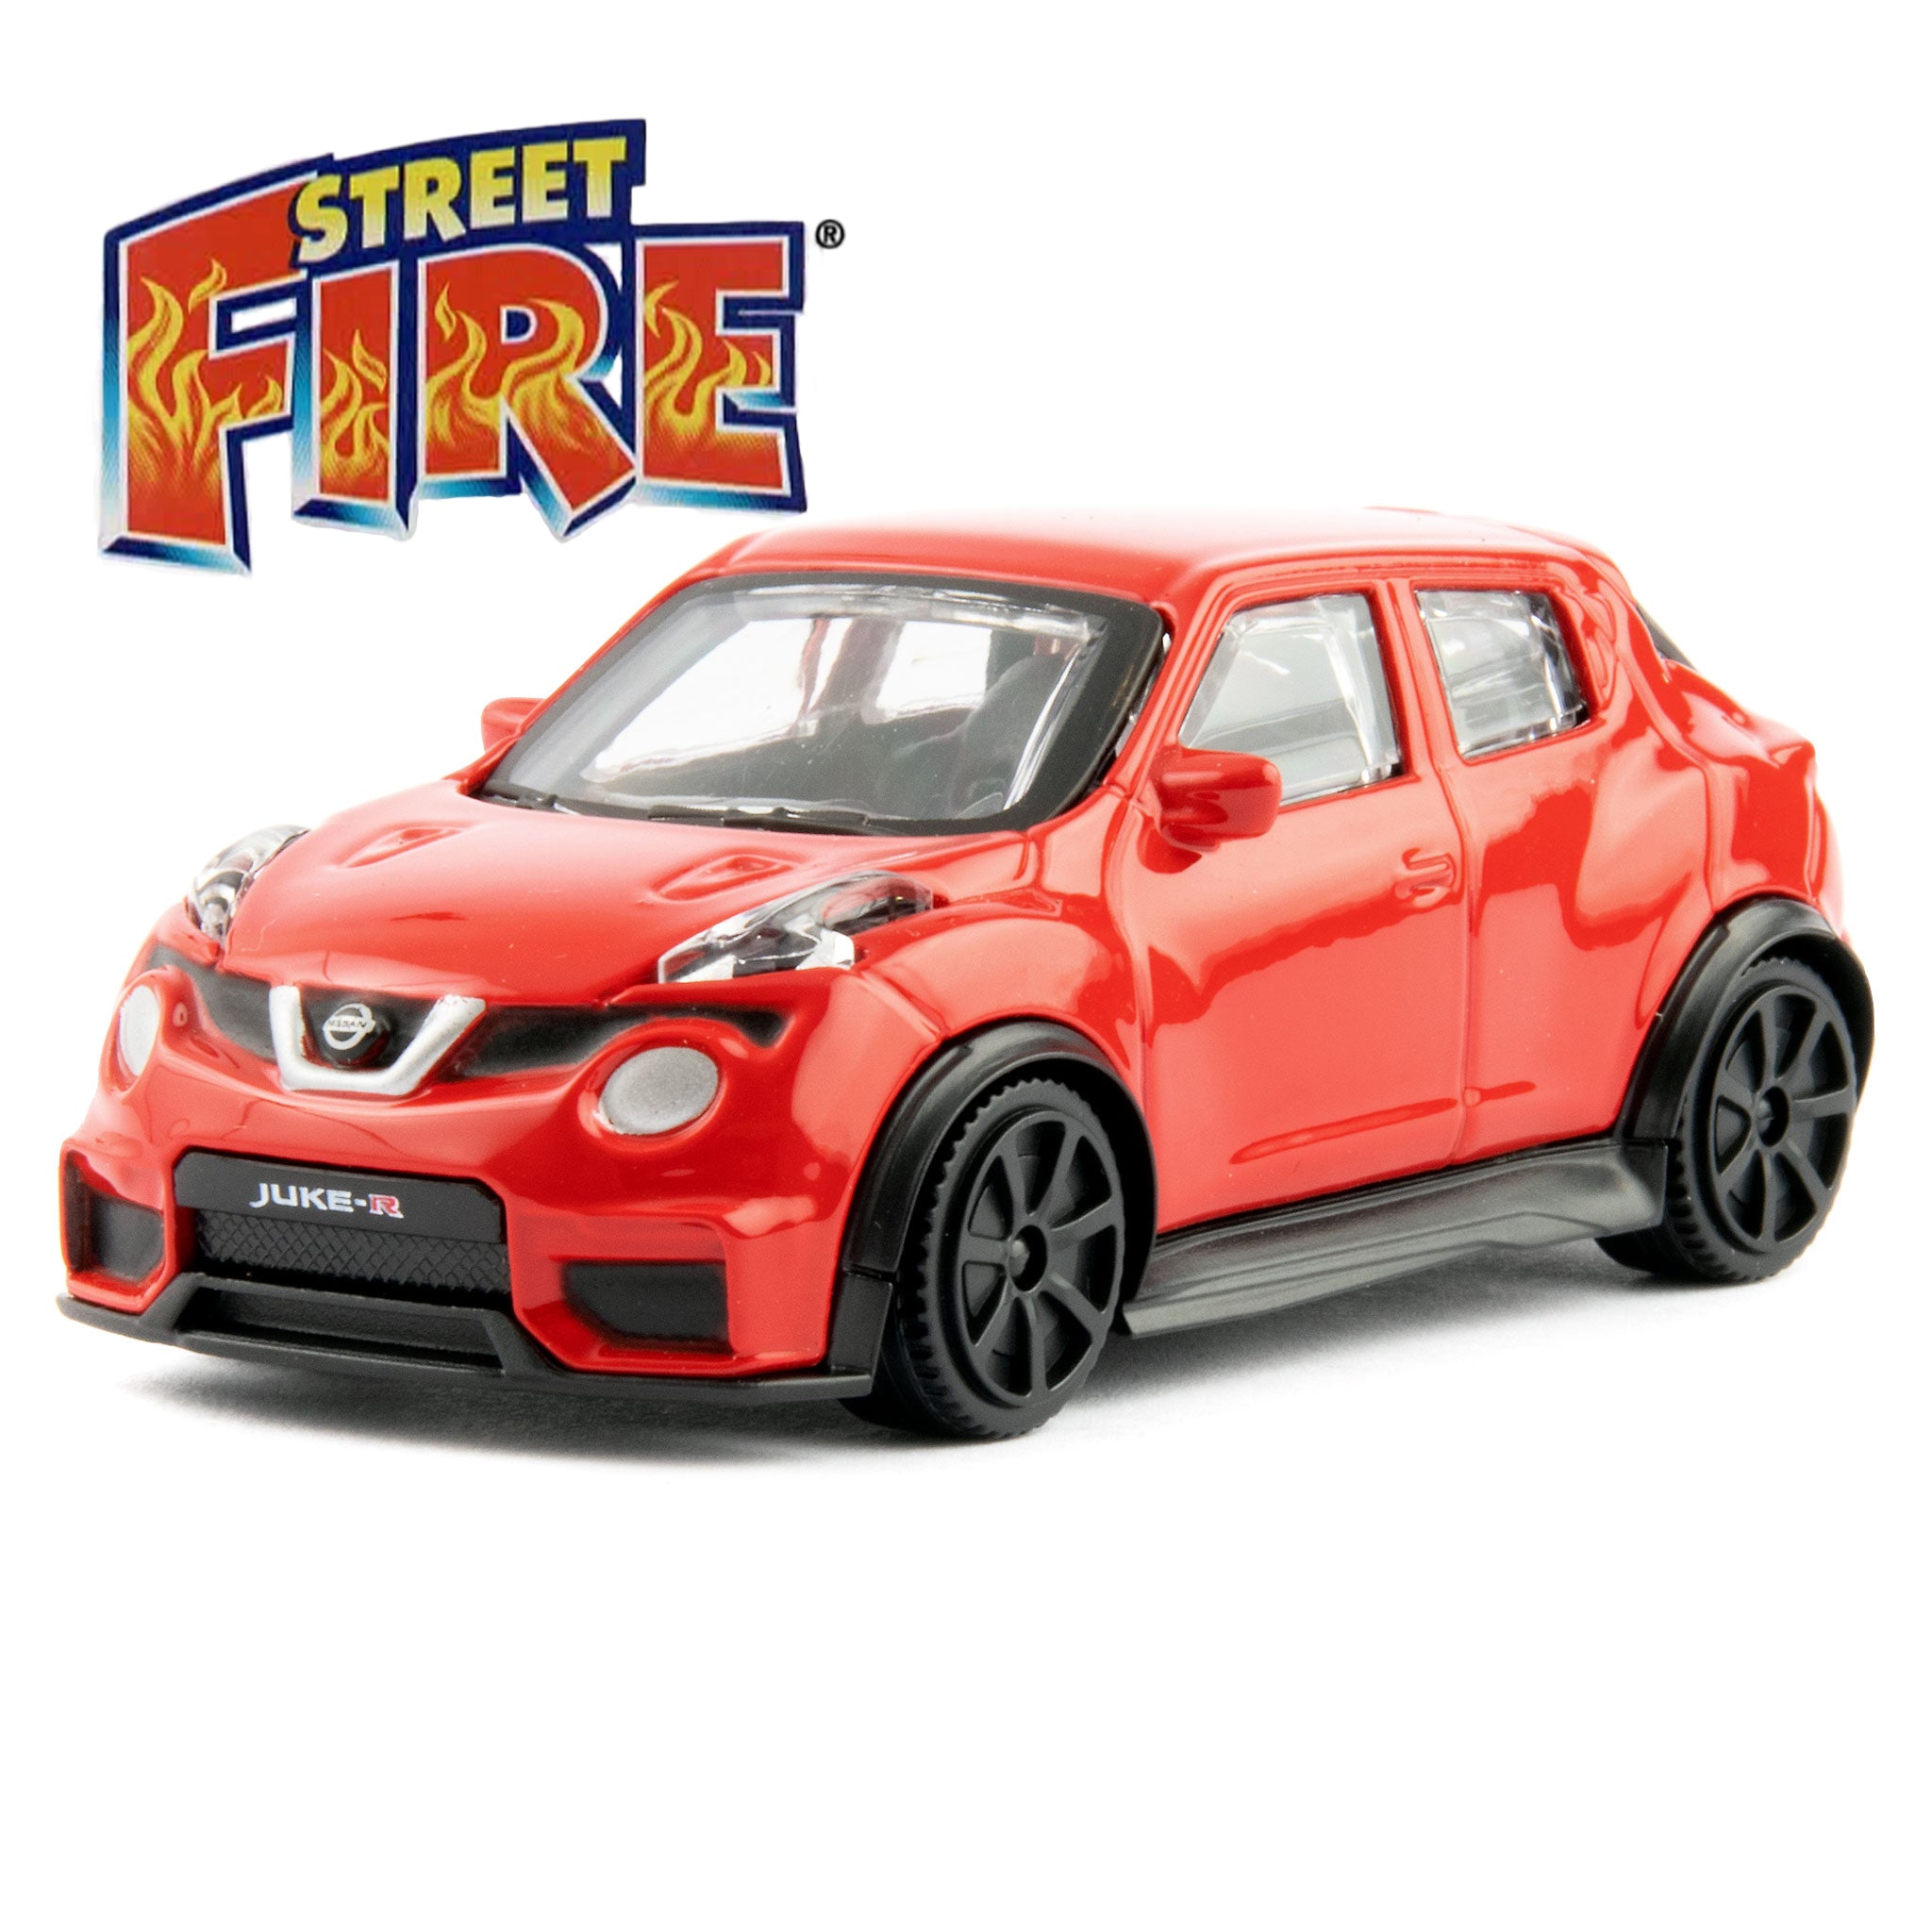 Nissan Juke R red - 1:43 Scale